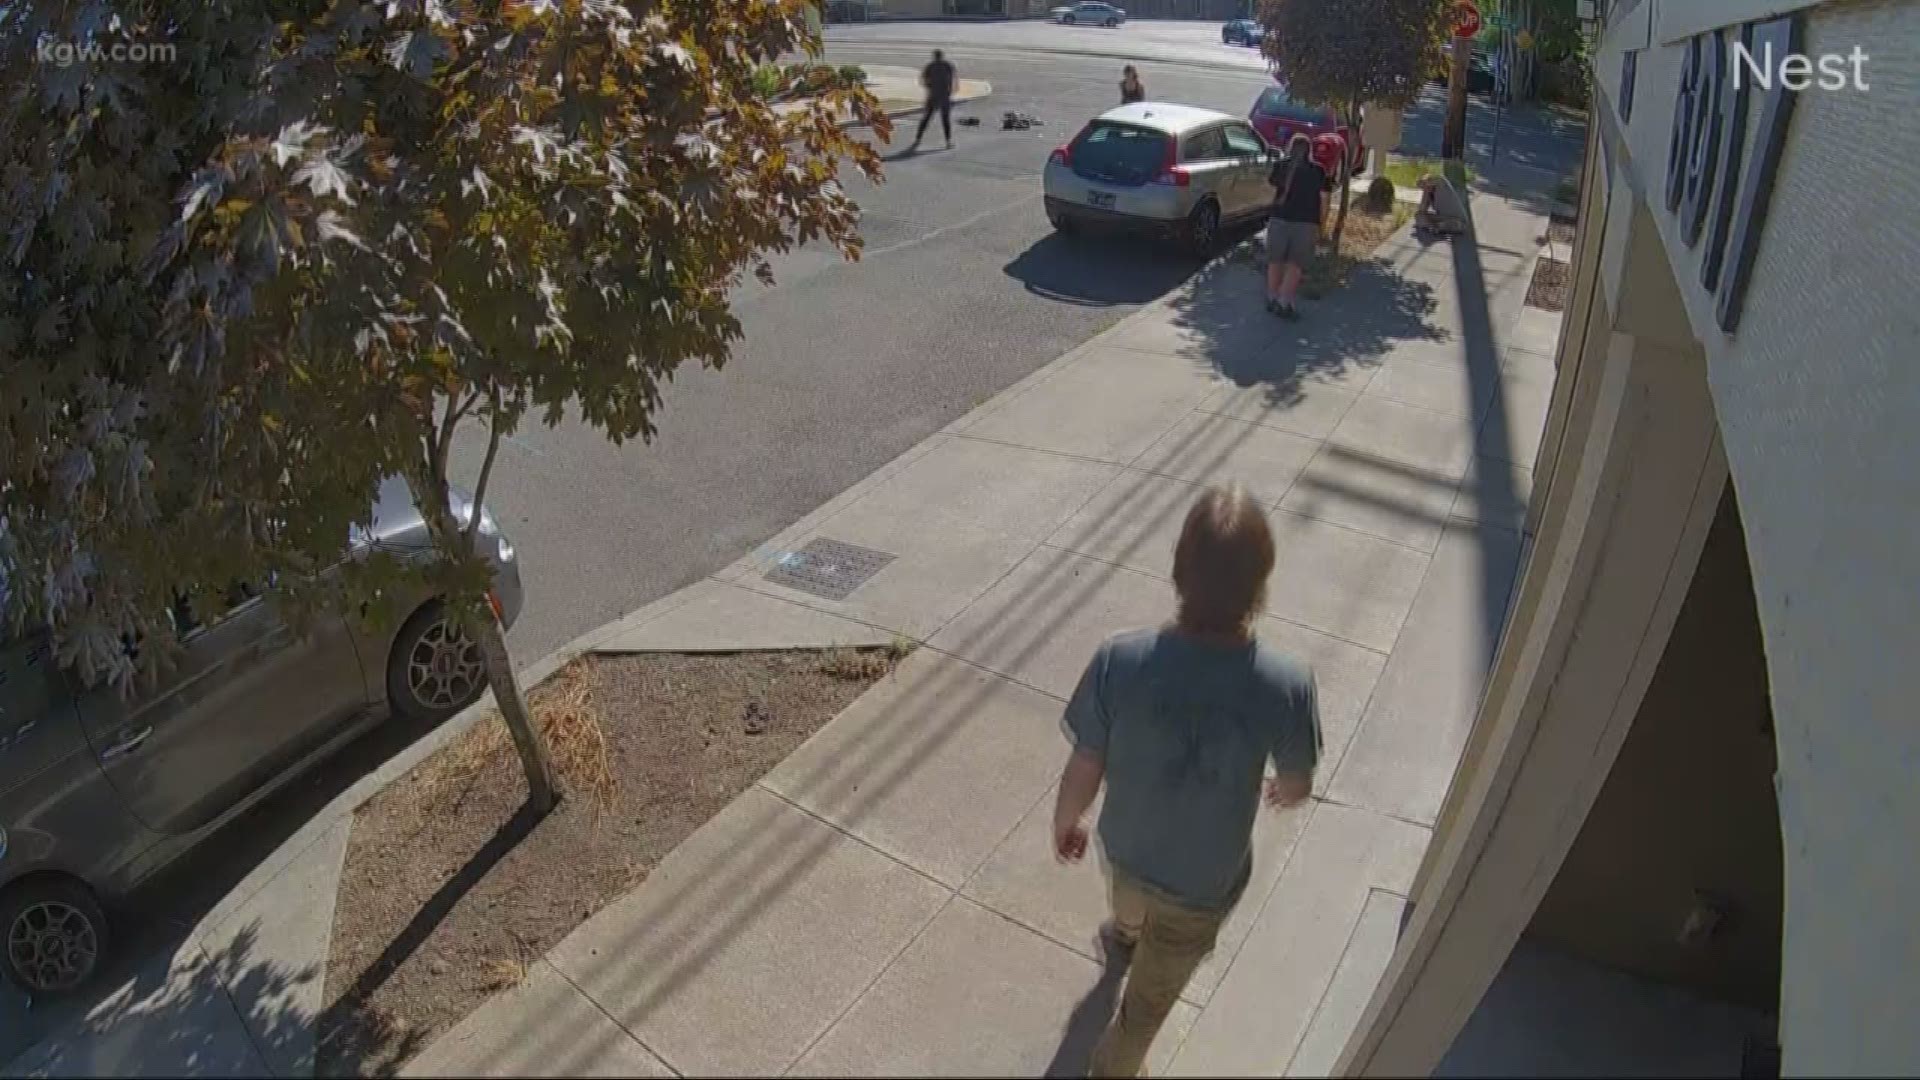 The confrontation near Northeast 60th Avenue and Holladay Street was caught on camera. The suspect is still on the loose.